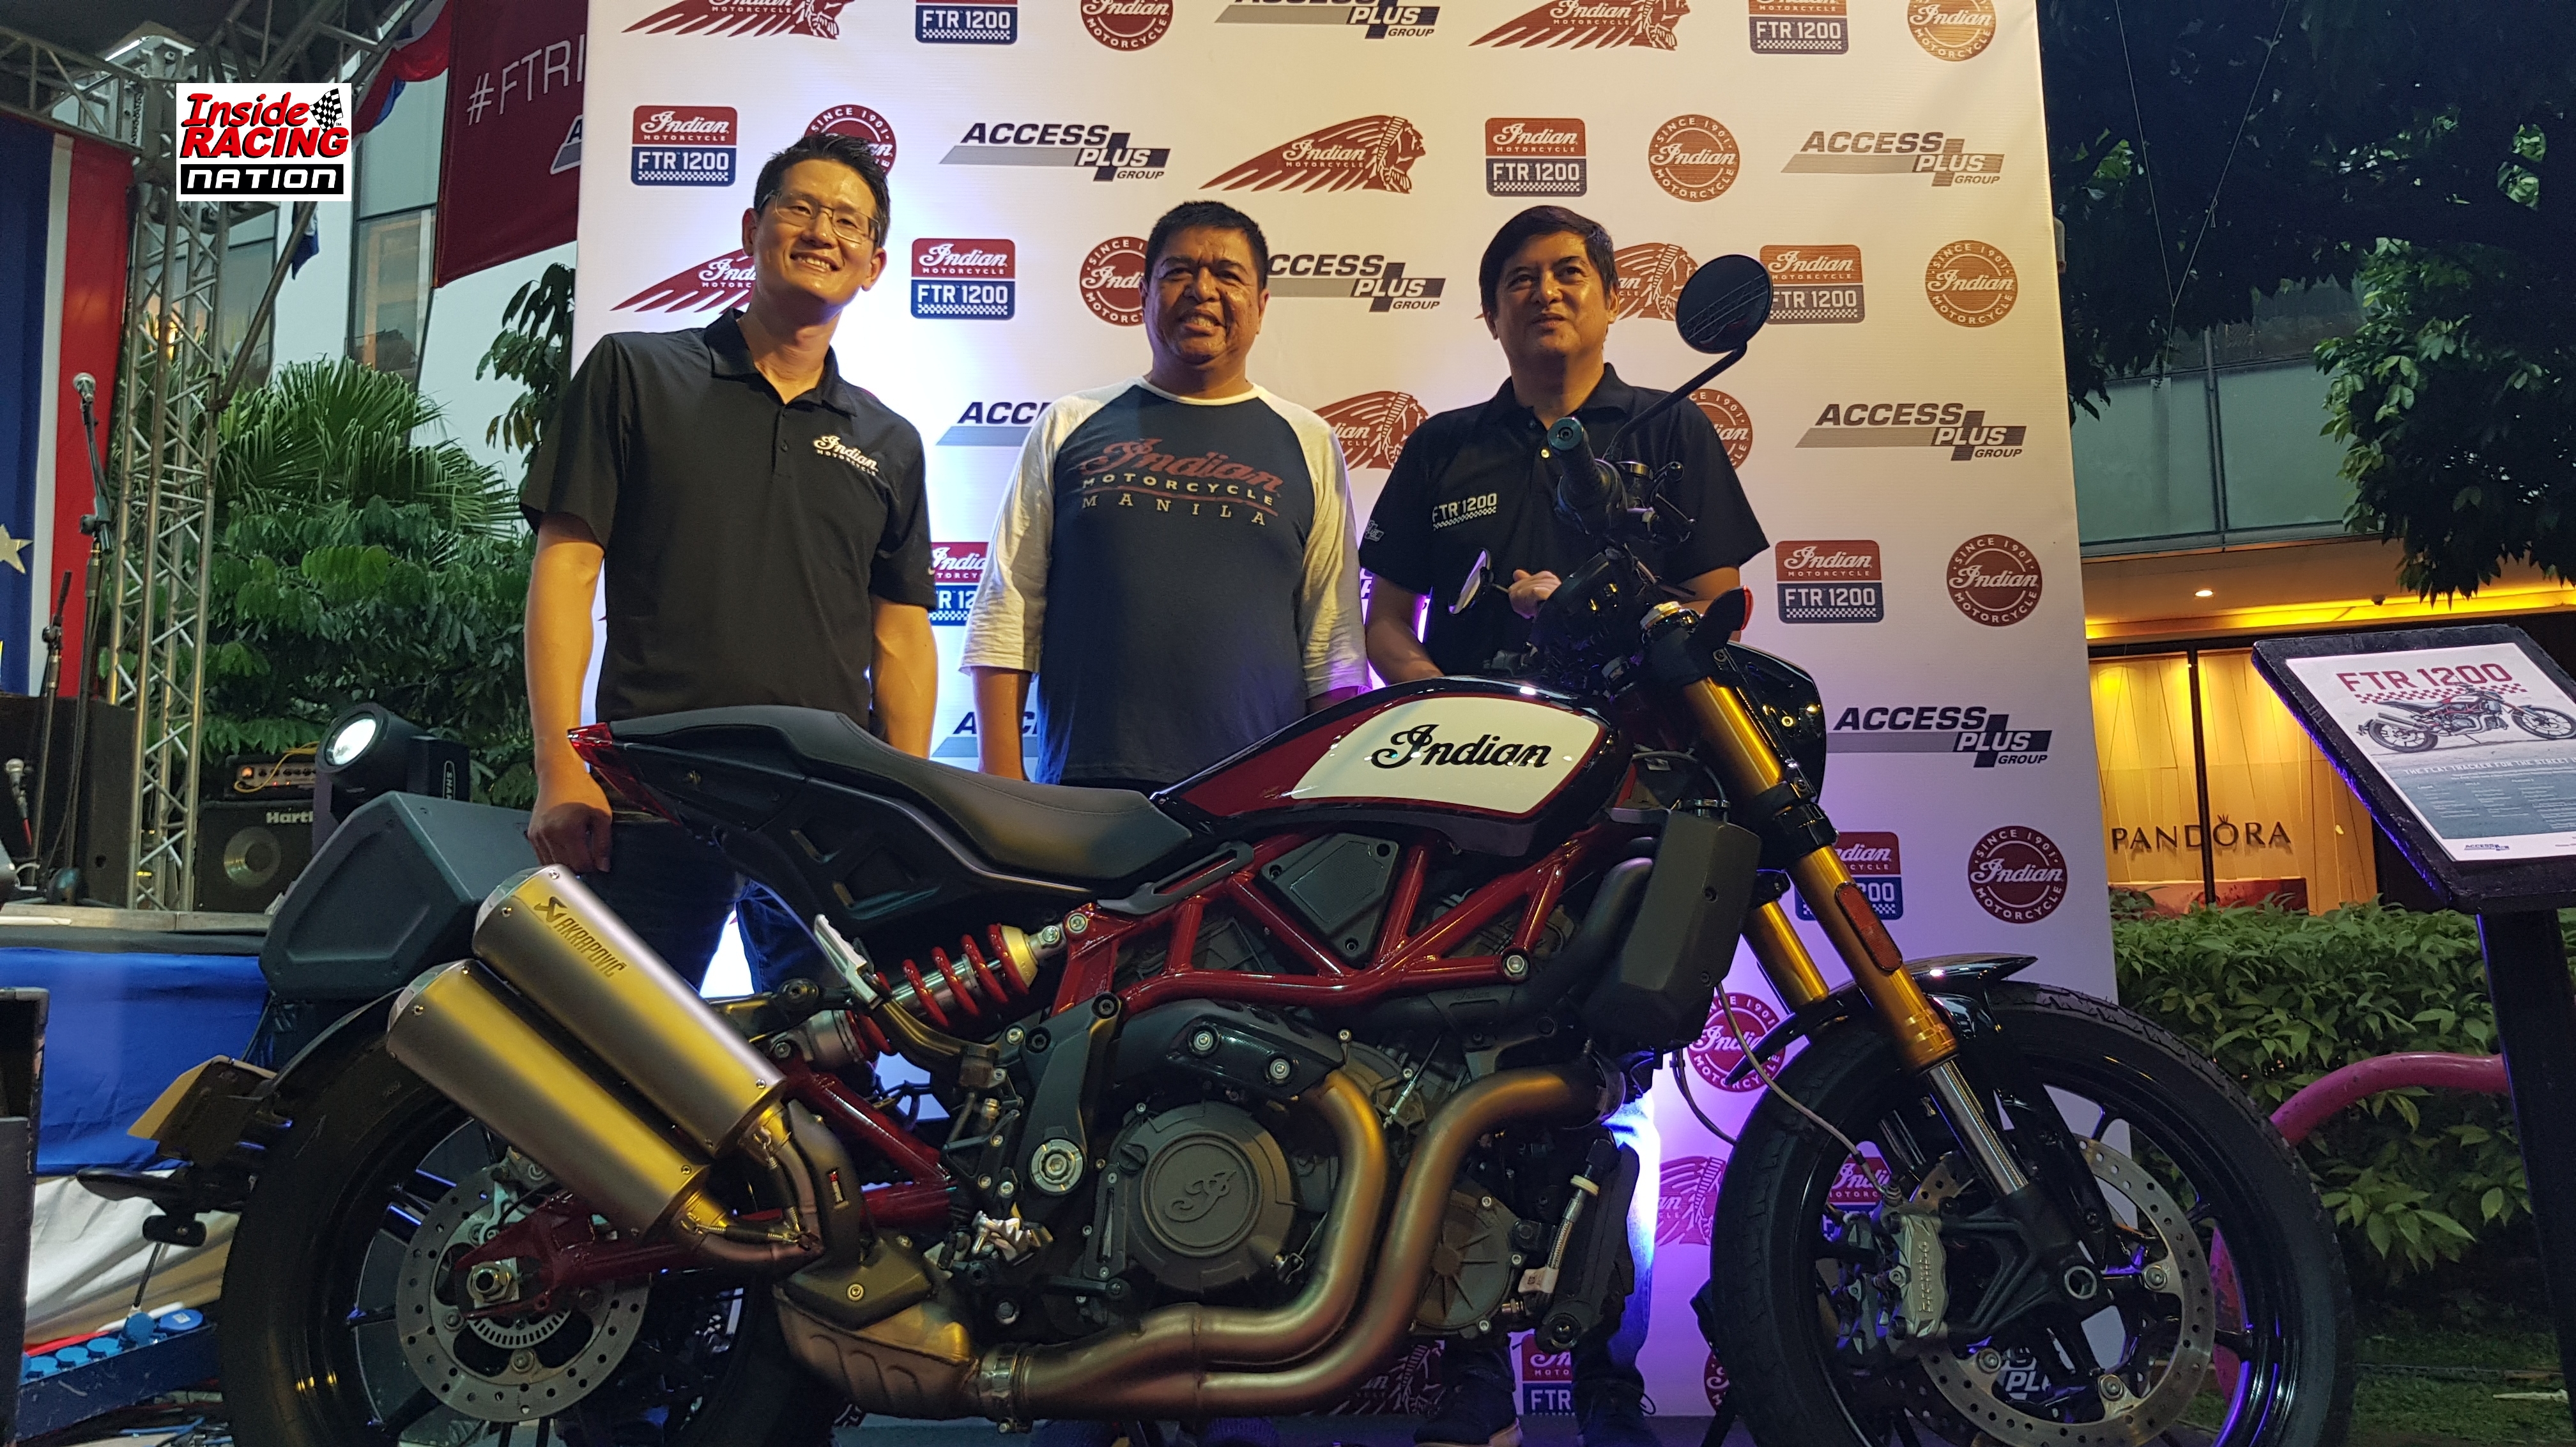 (L-R) International Sales Manager of Indian Motorcycle and Polaris Industries Asia Pacific- Mr. Jake Jung, Access Plus President Mr. Toti Alberto, Indian Motorcycles Philippines General Manager Mr. Ted Alberto